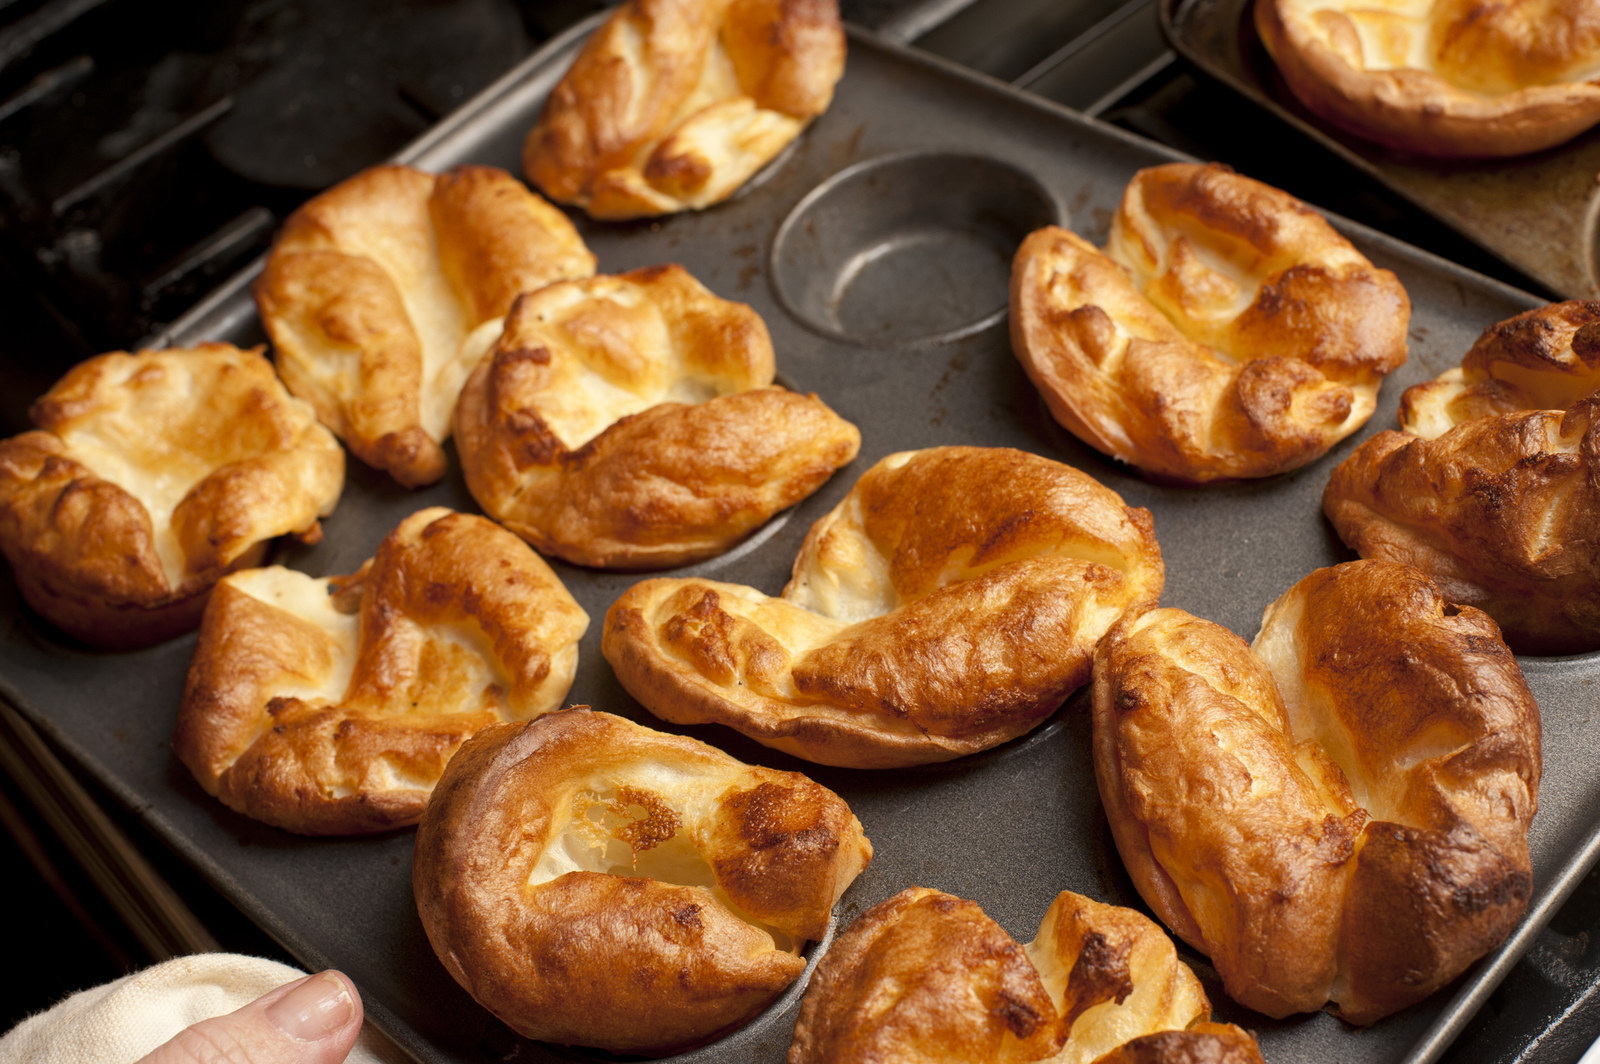 This is a Yorkshire pudding, also not a dessert. 